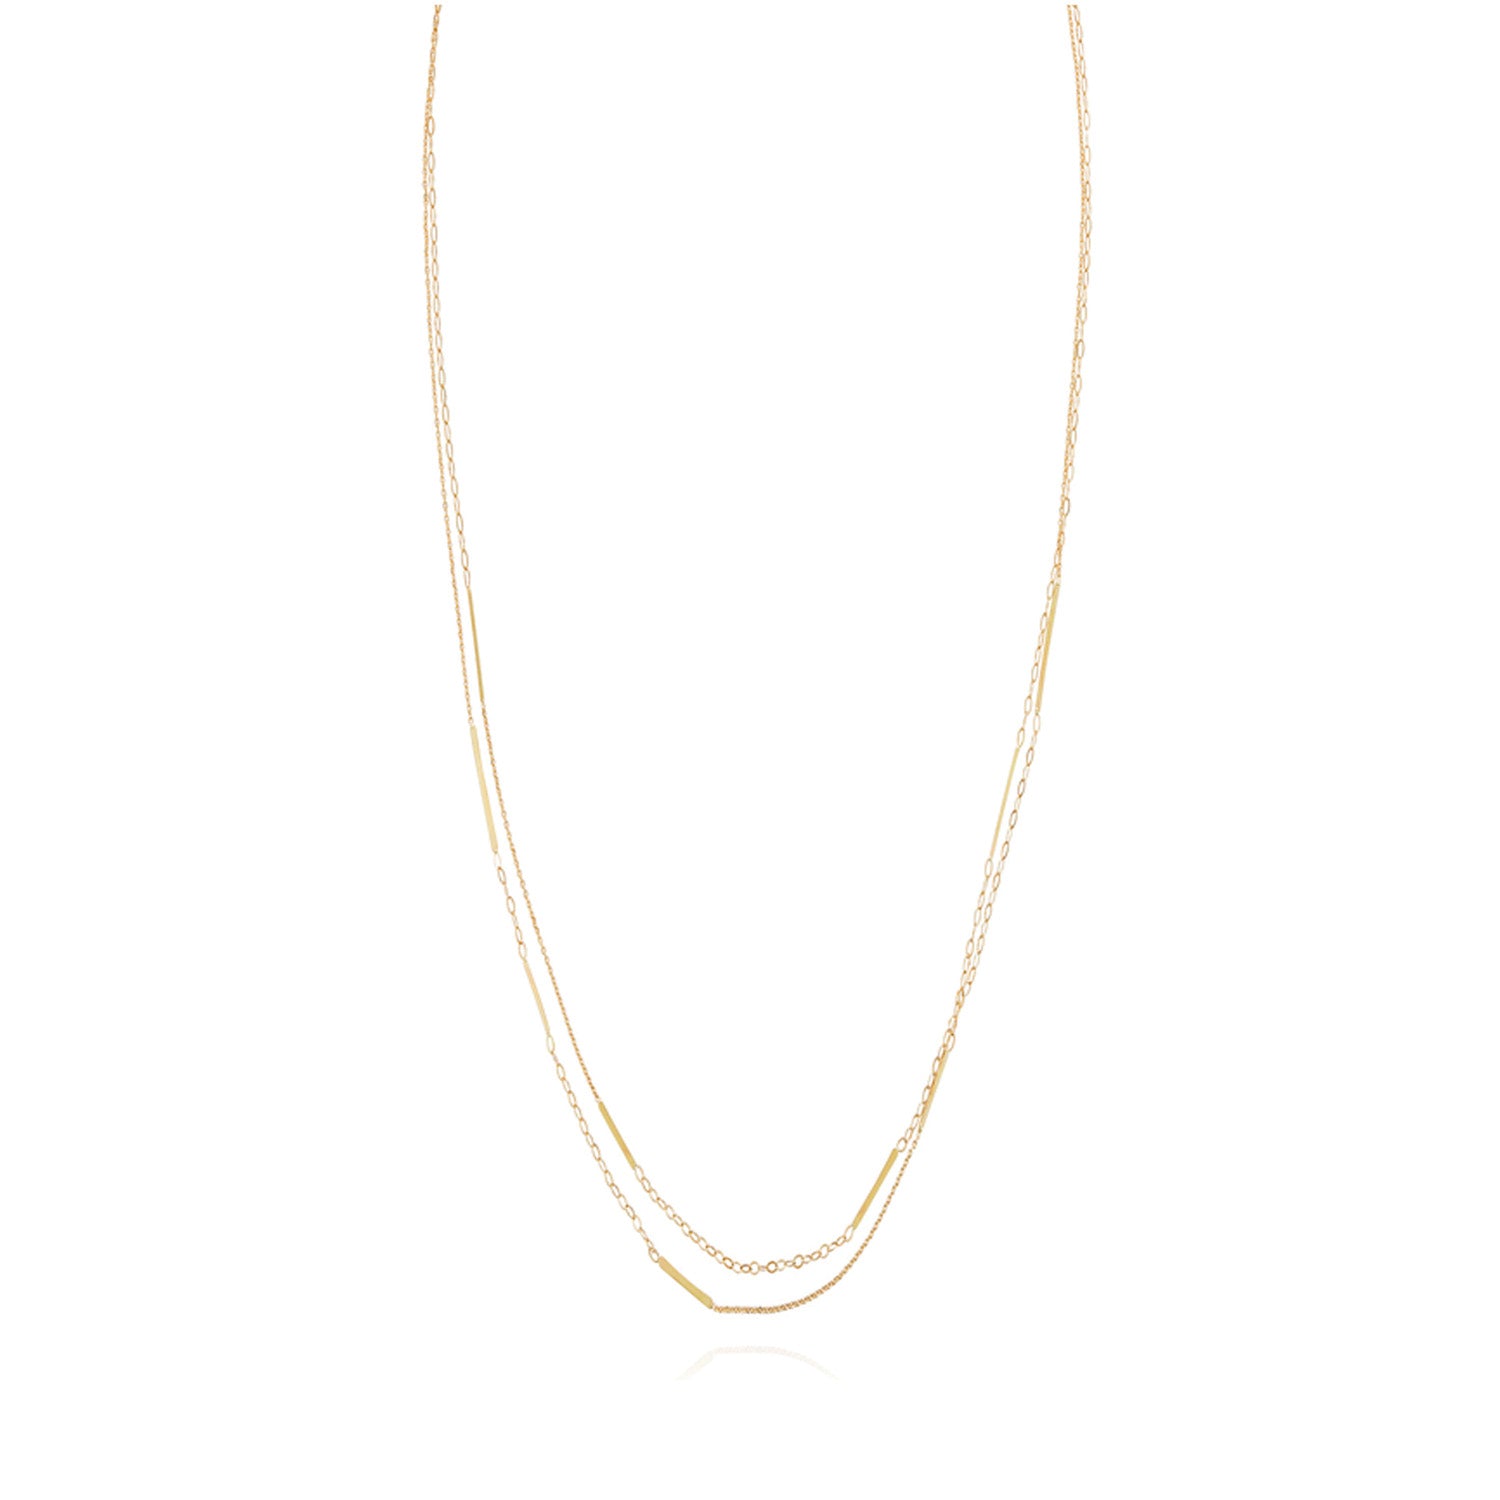 18ct yellow gold long chain necklace with inserted  golden bars 